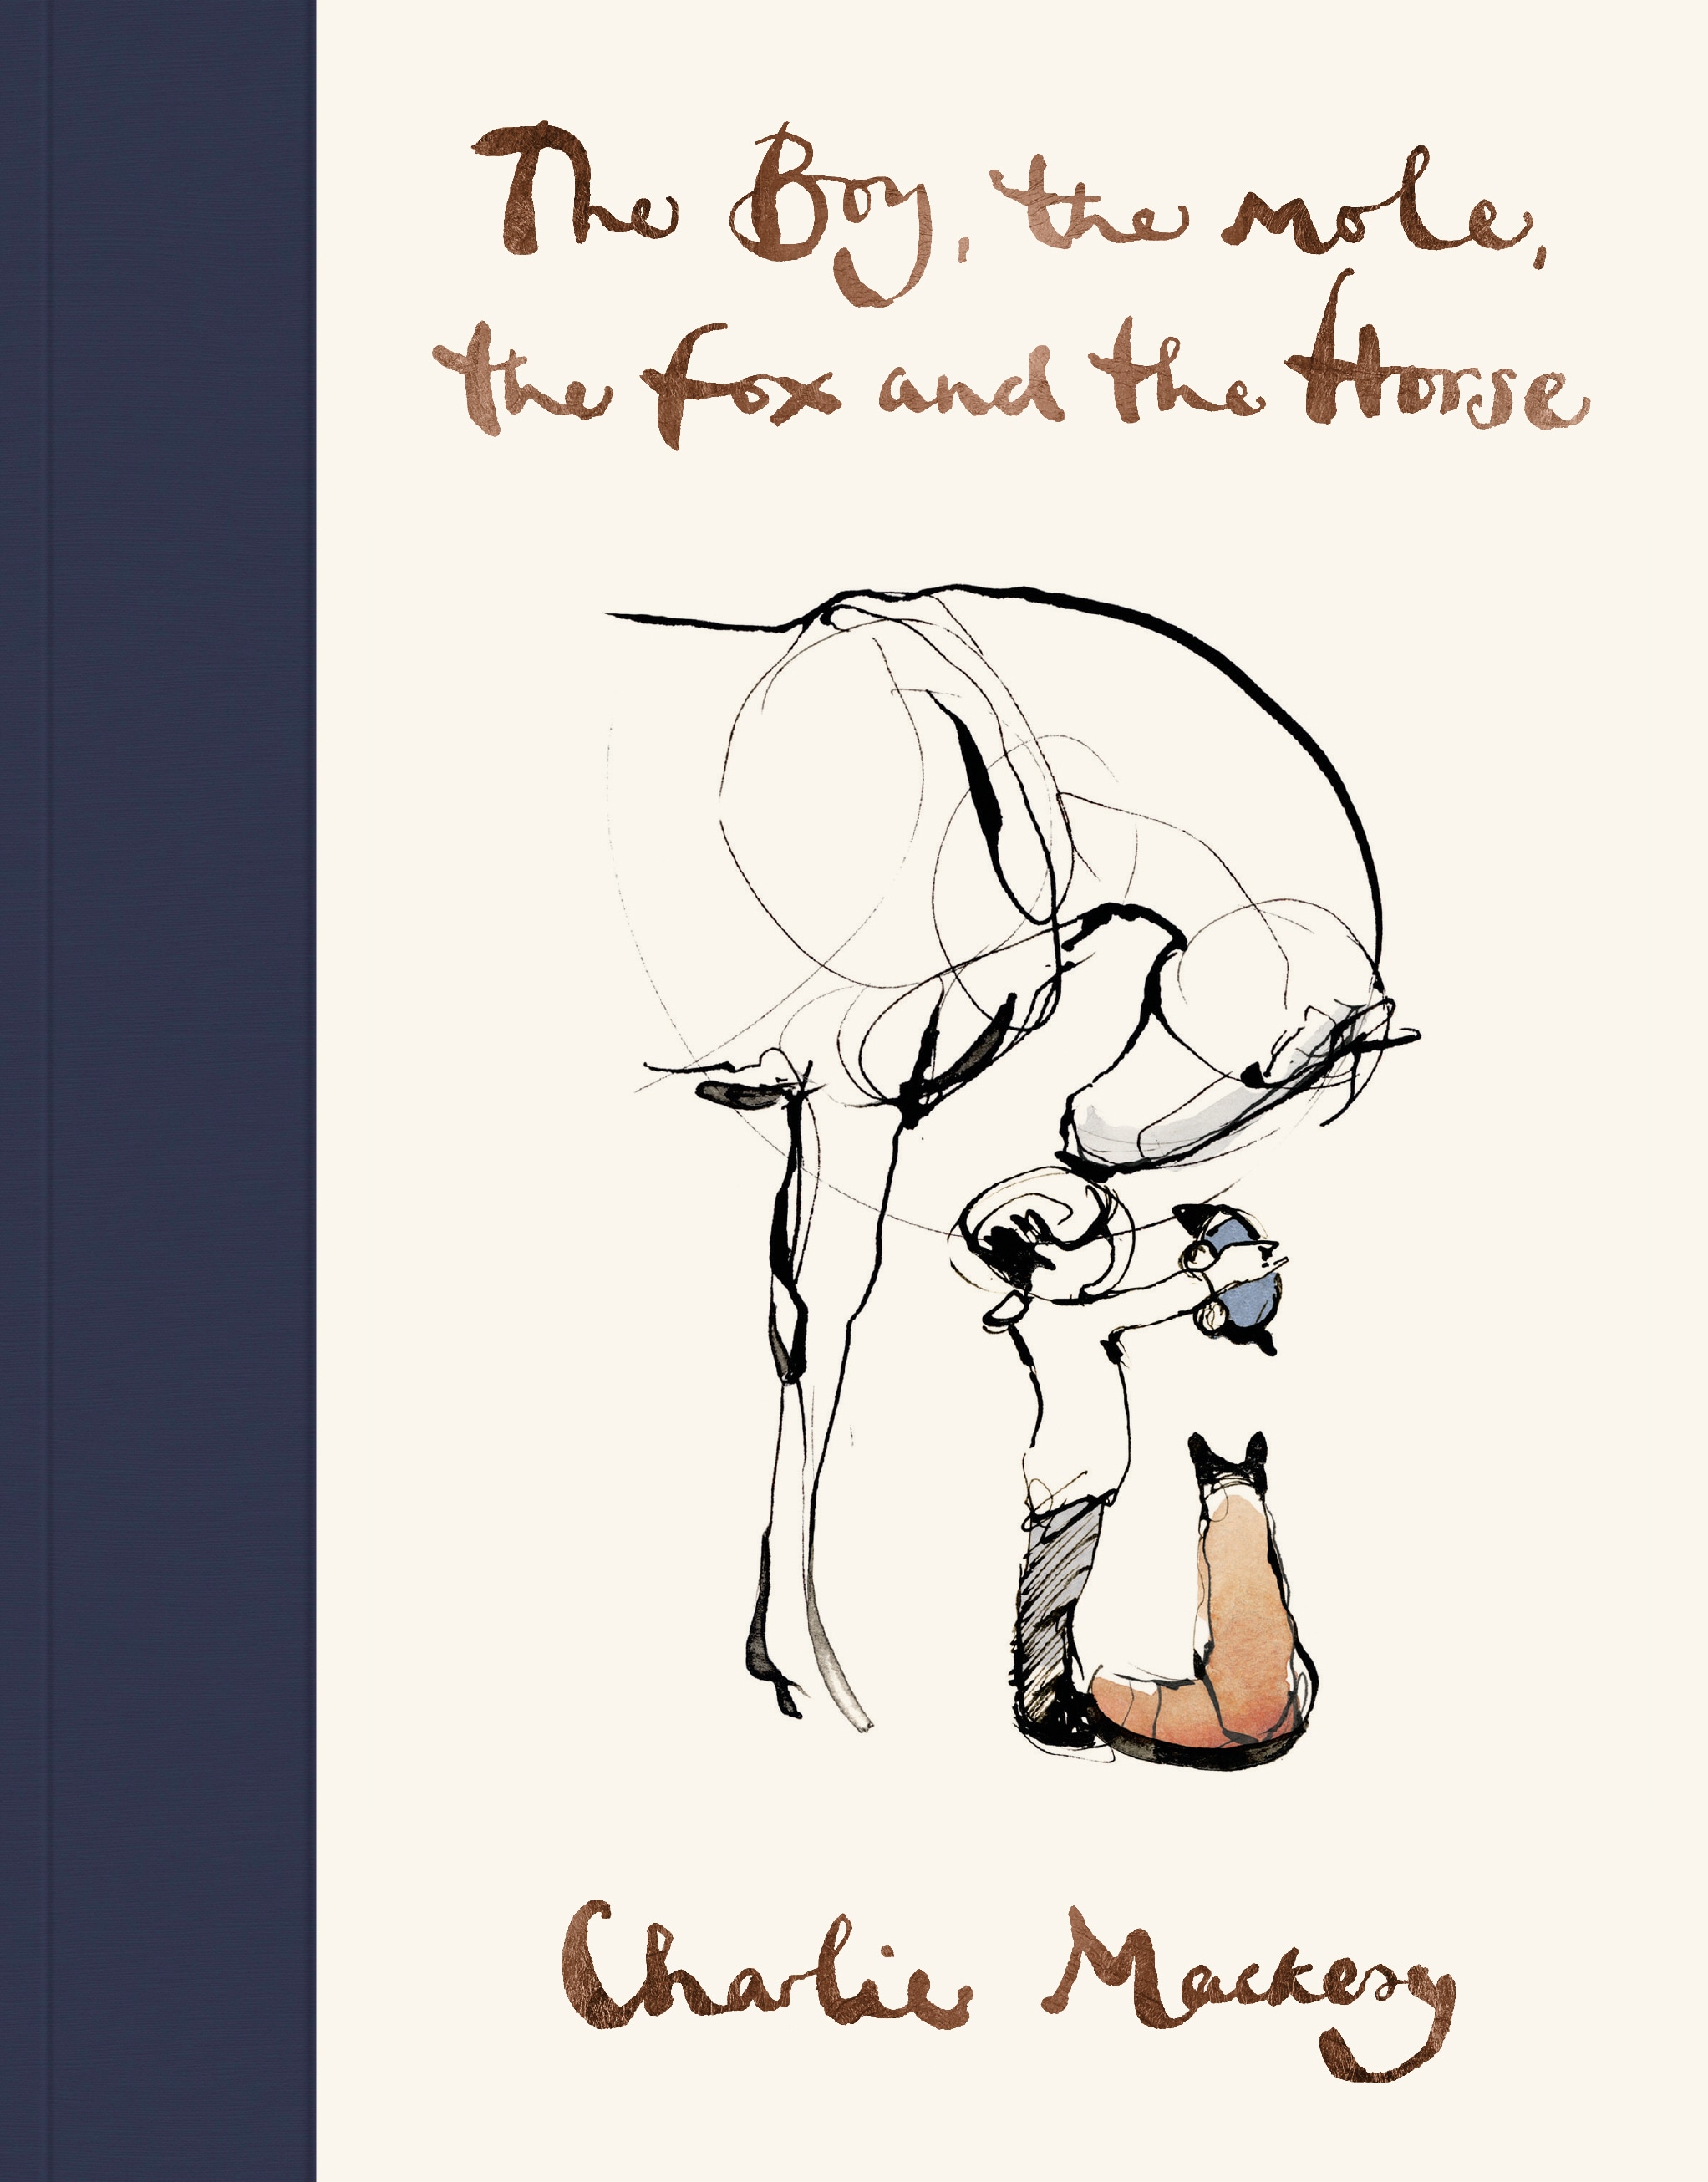 Book “The Boy, The Mole, The Fox and The Horse” by Charlie Mackesy — October 10, 2019